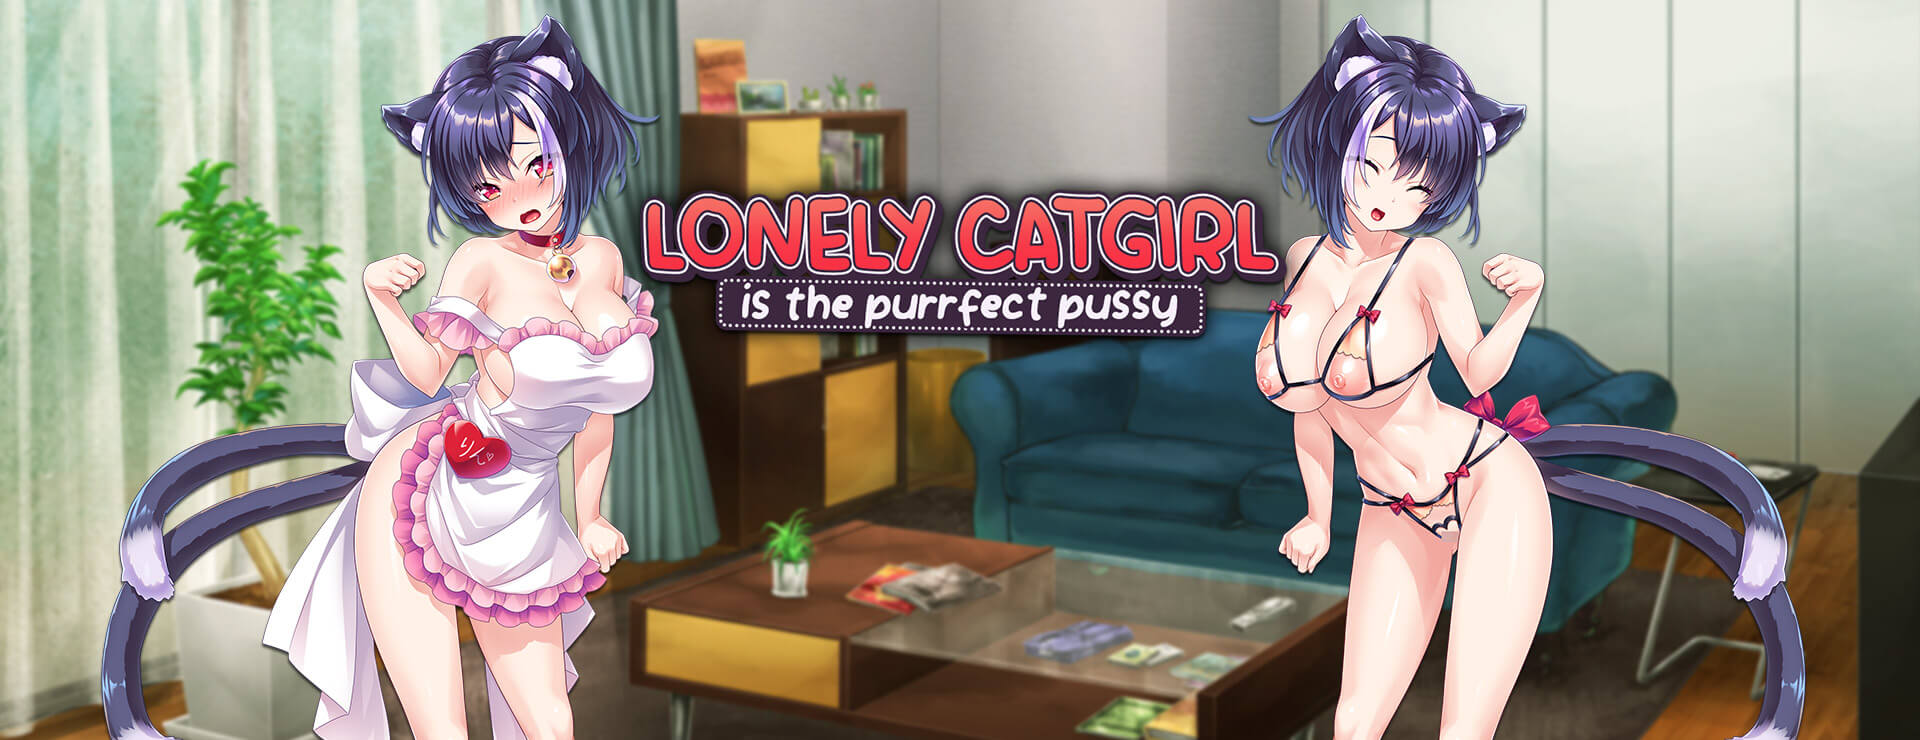 Lonely Catgirl is the Purrfect Pussy - Novela Visual Juego